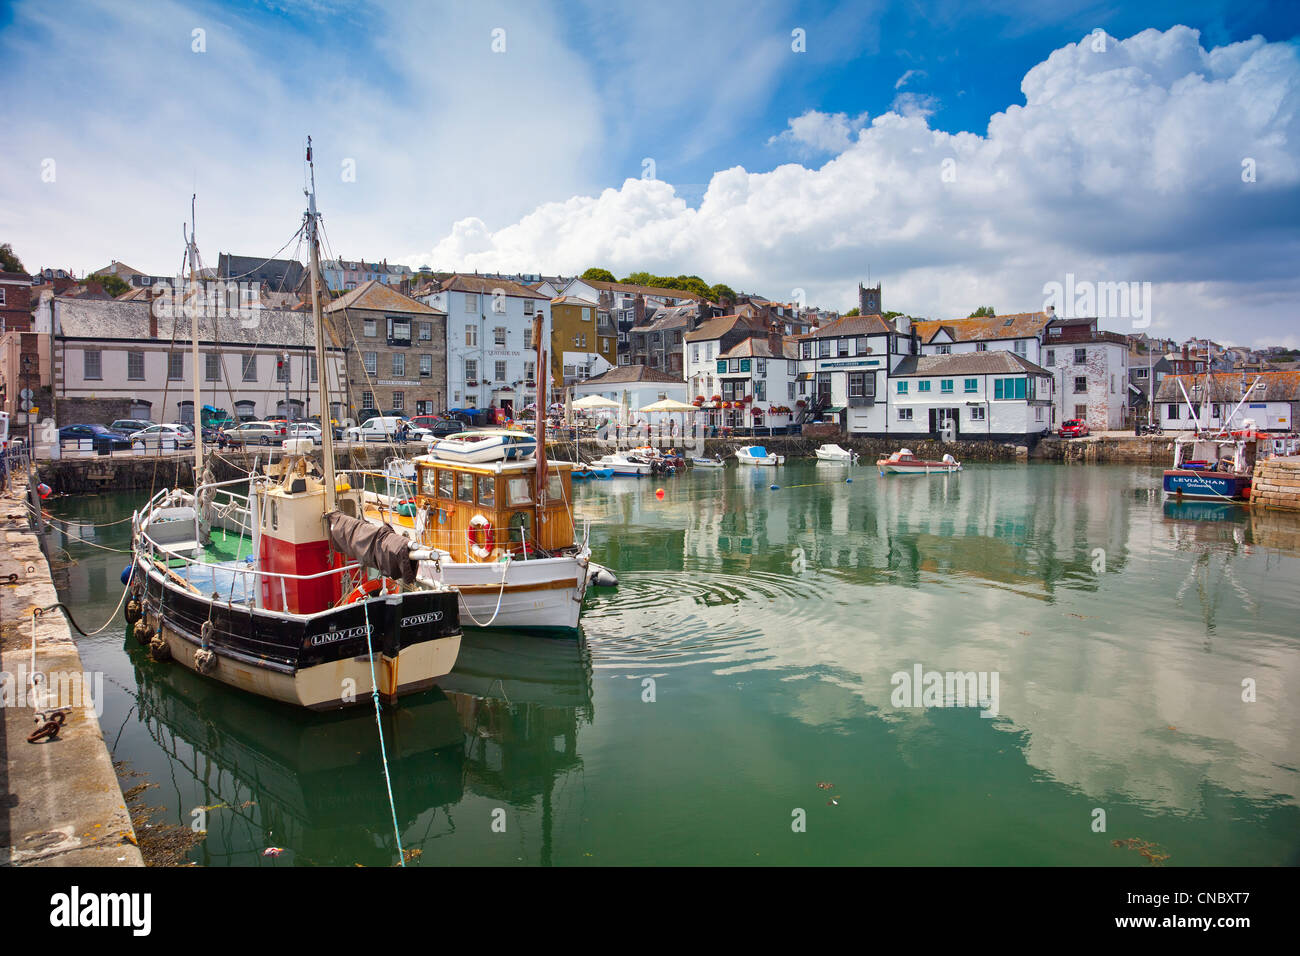 A mixture of different inns and pubs surround the original harbour in Falmouth, Cornwall, England, UK Stock Photo